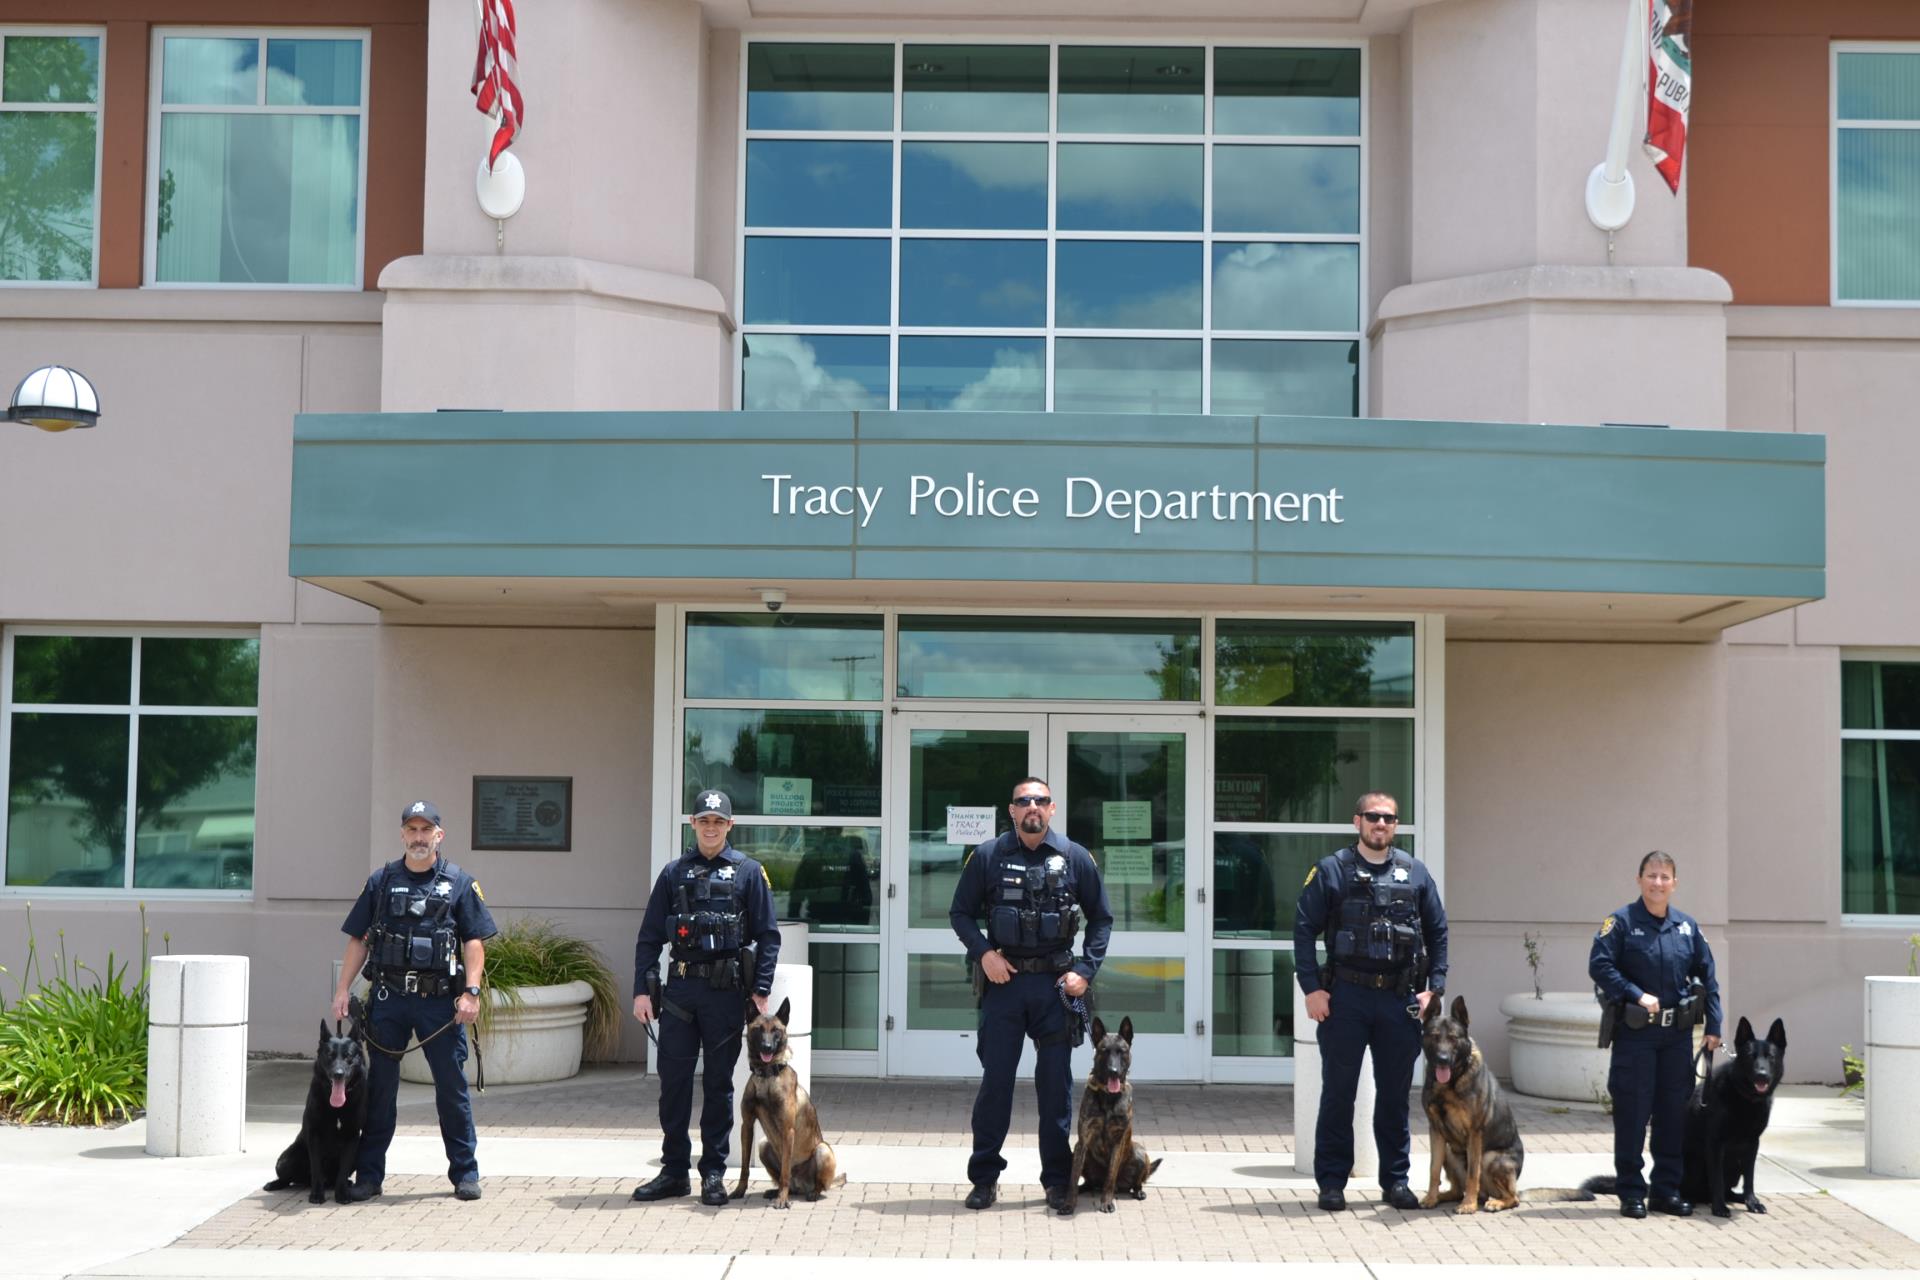 Image of City of Tracy Police Department